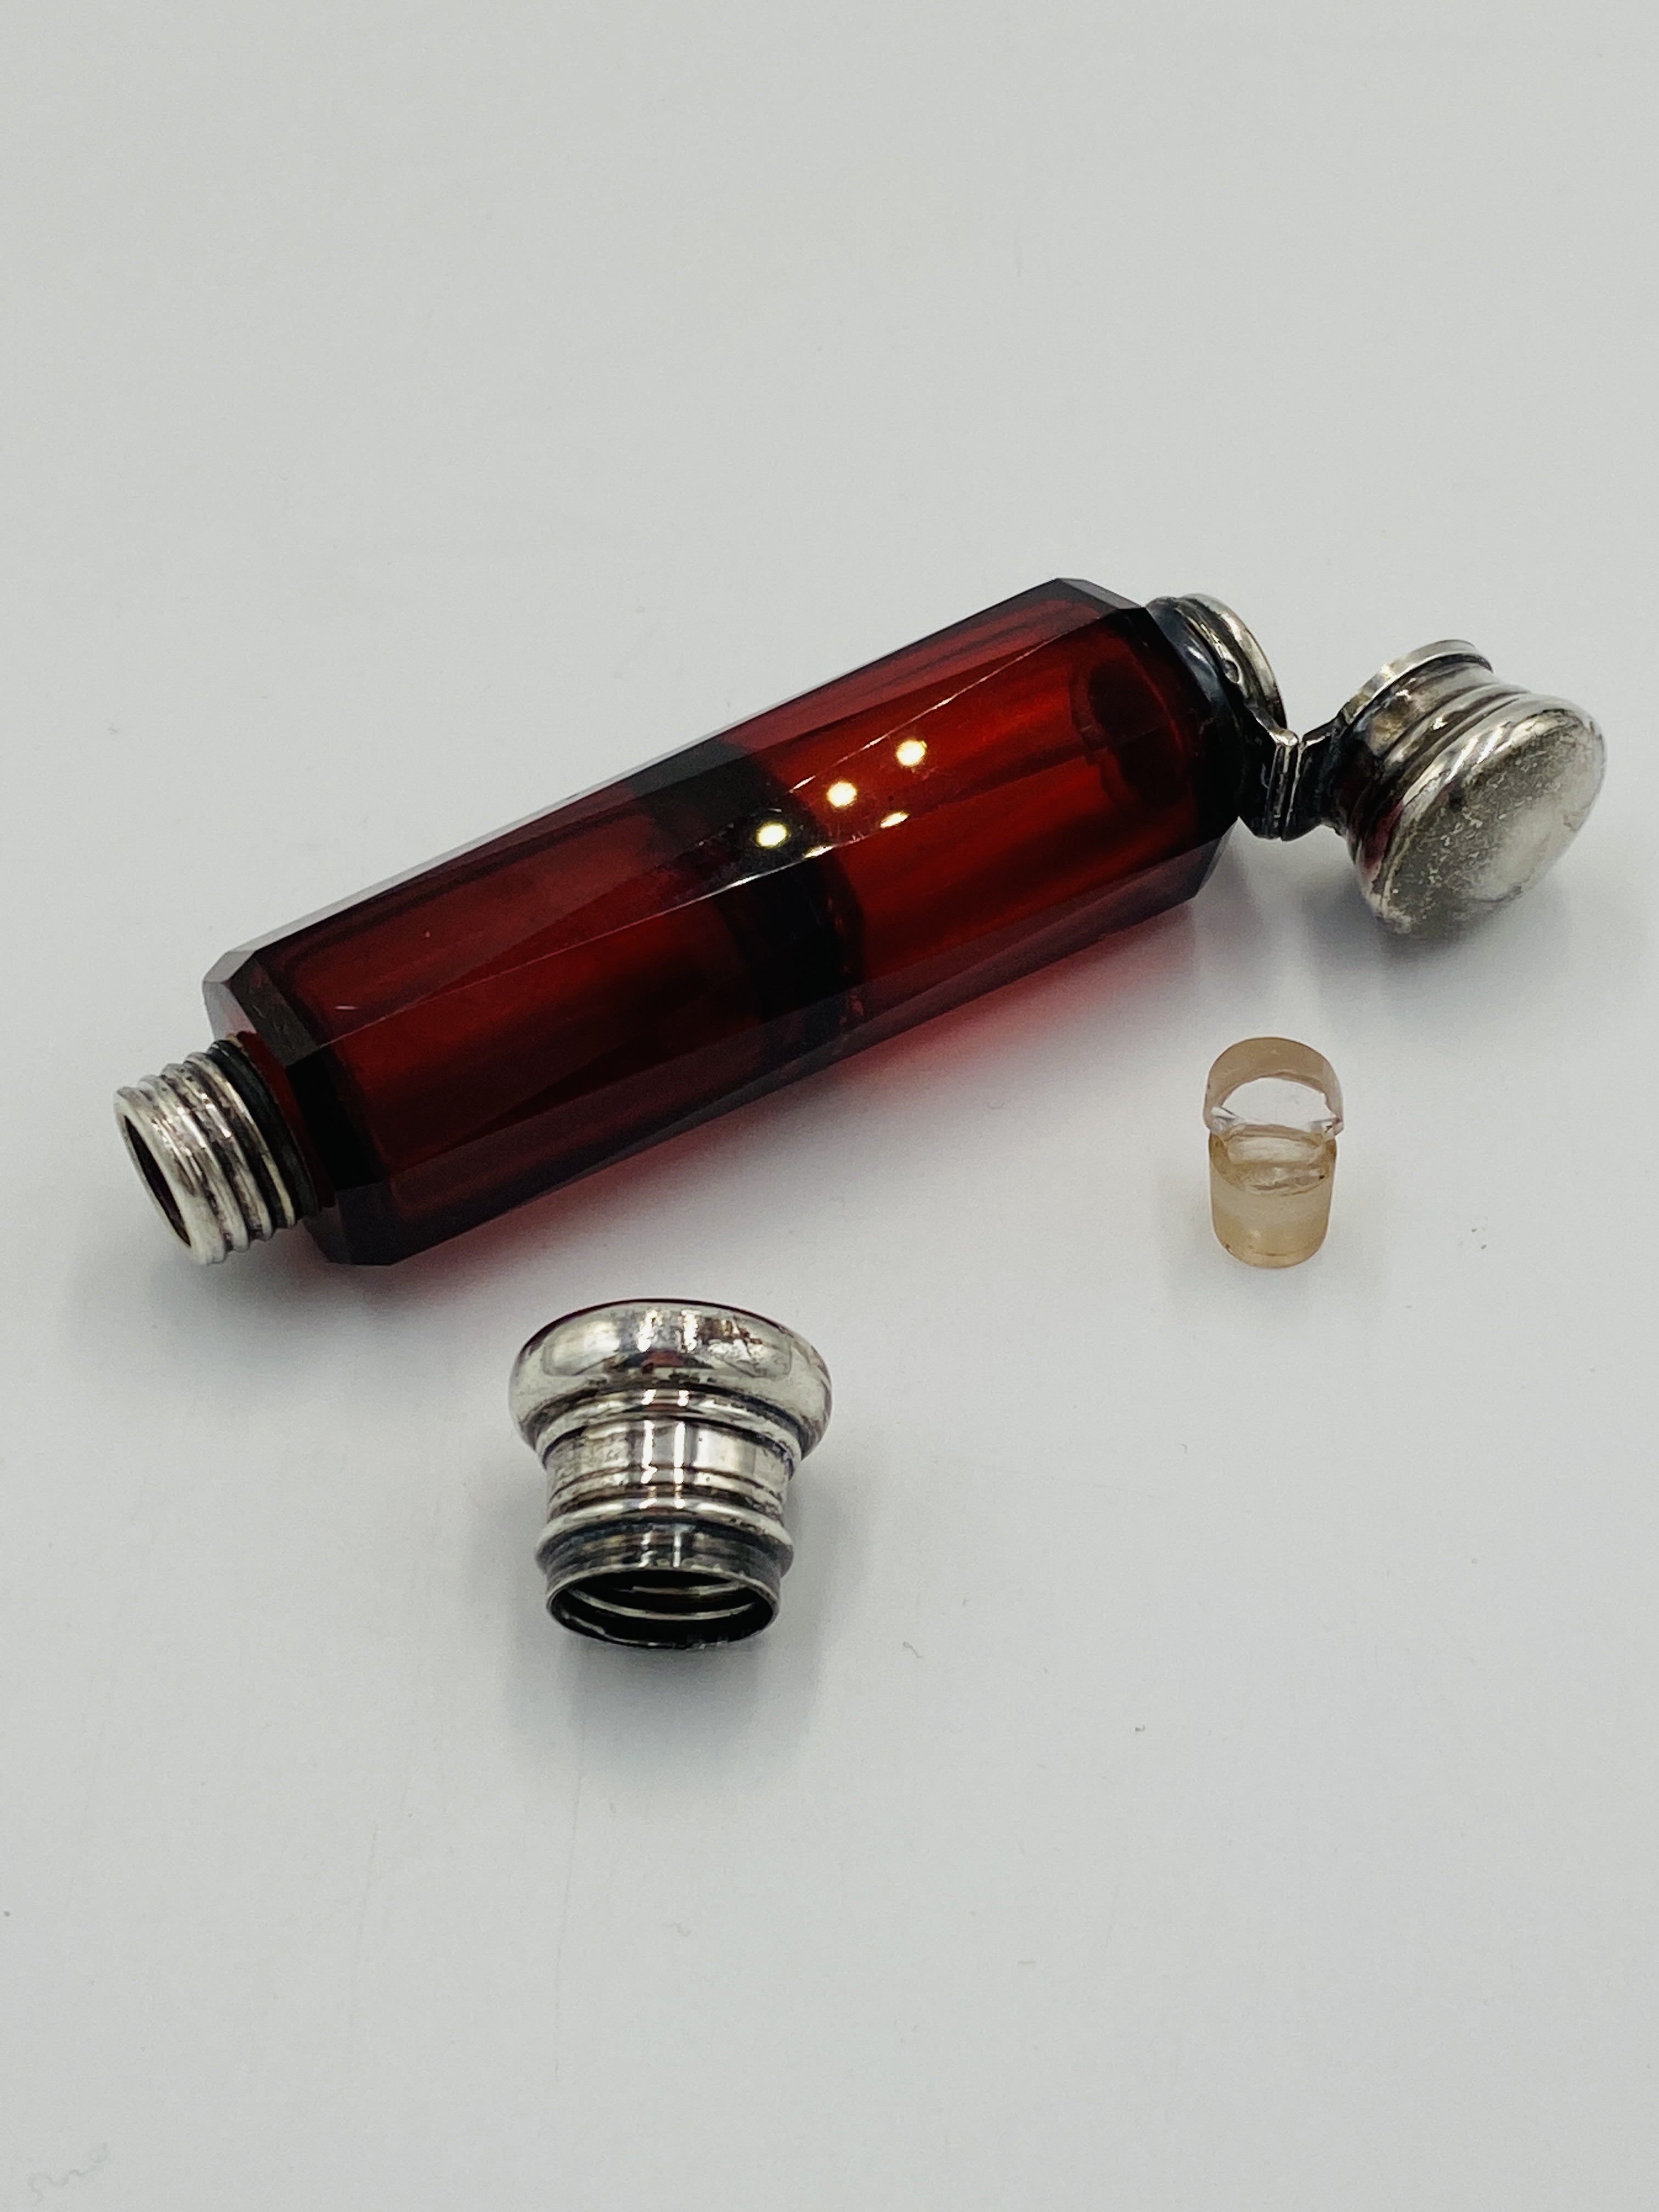 Ruby glass double ended perfume bottle with white metal tops - Image 4 of 5